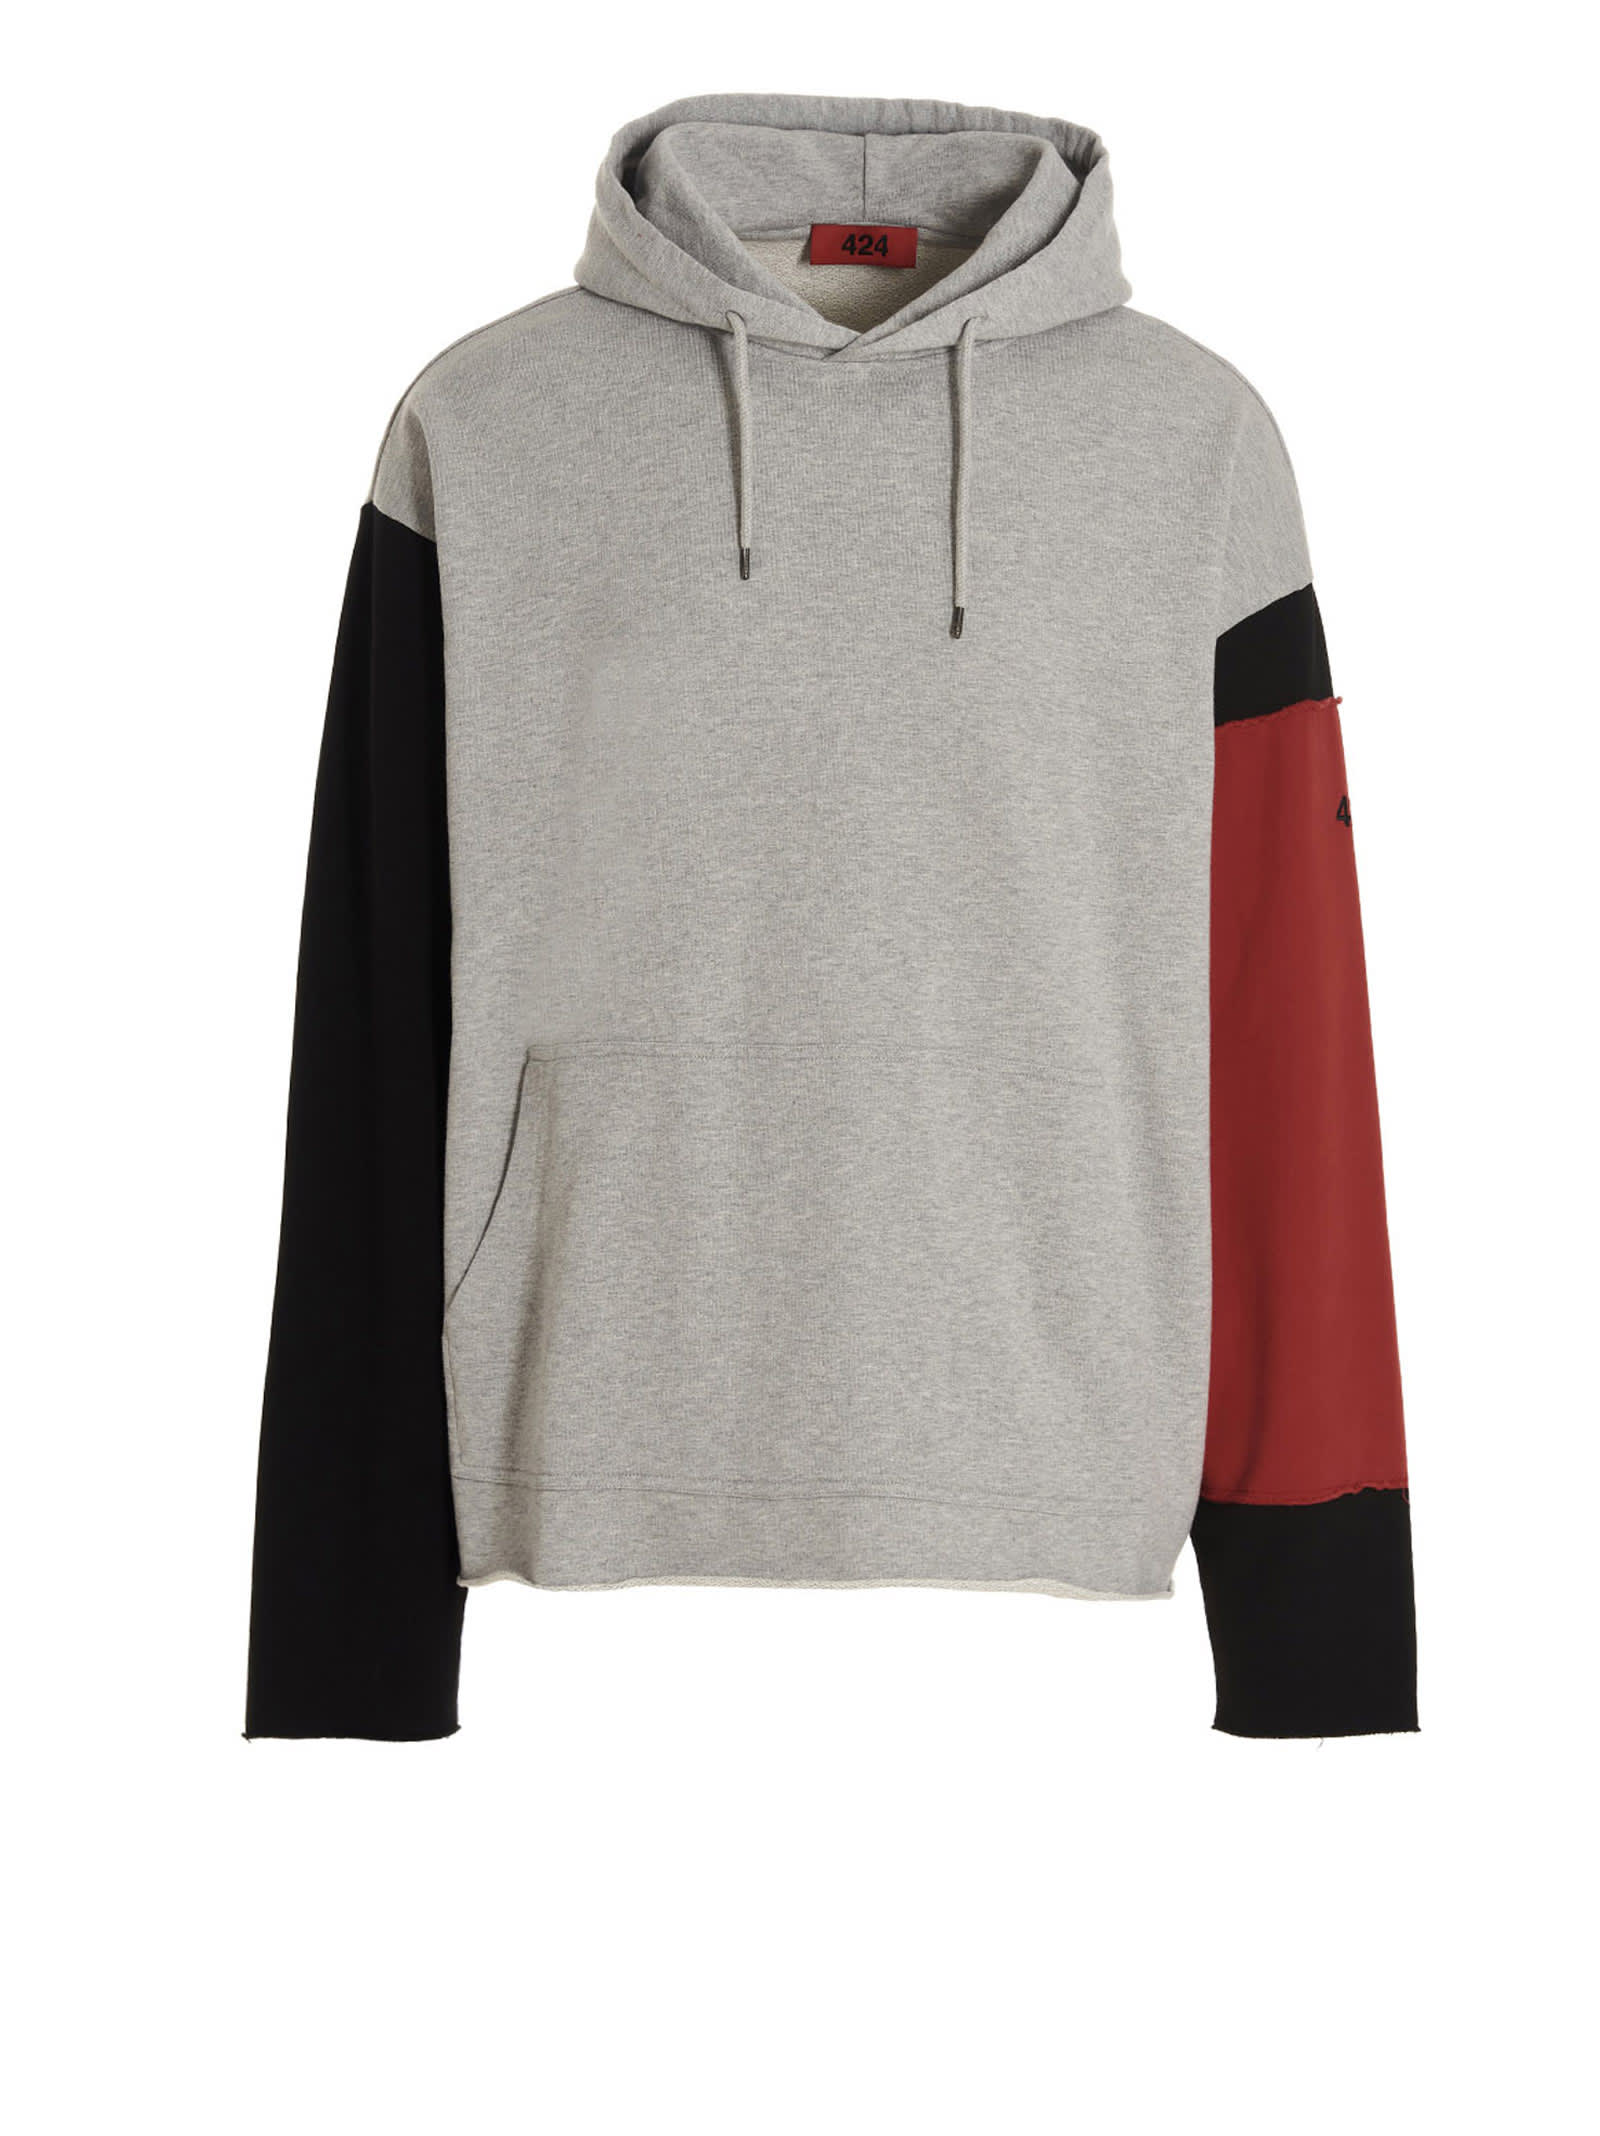 FourTwoFour on Fairfax Hoodie Featuring Contrasting Sleeves